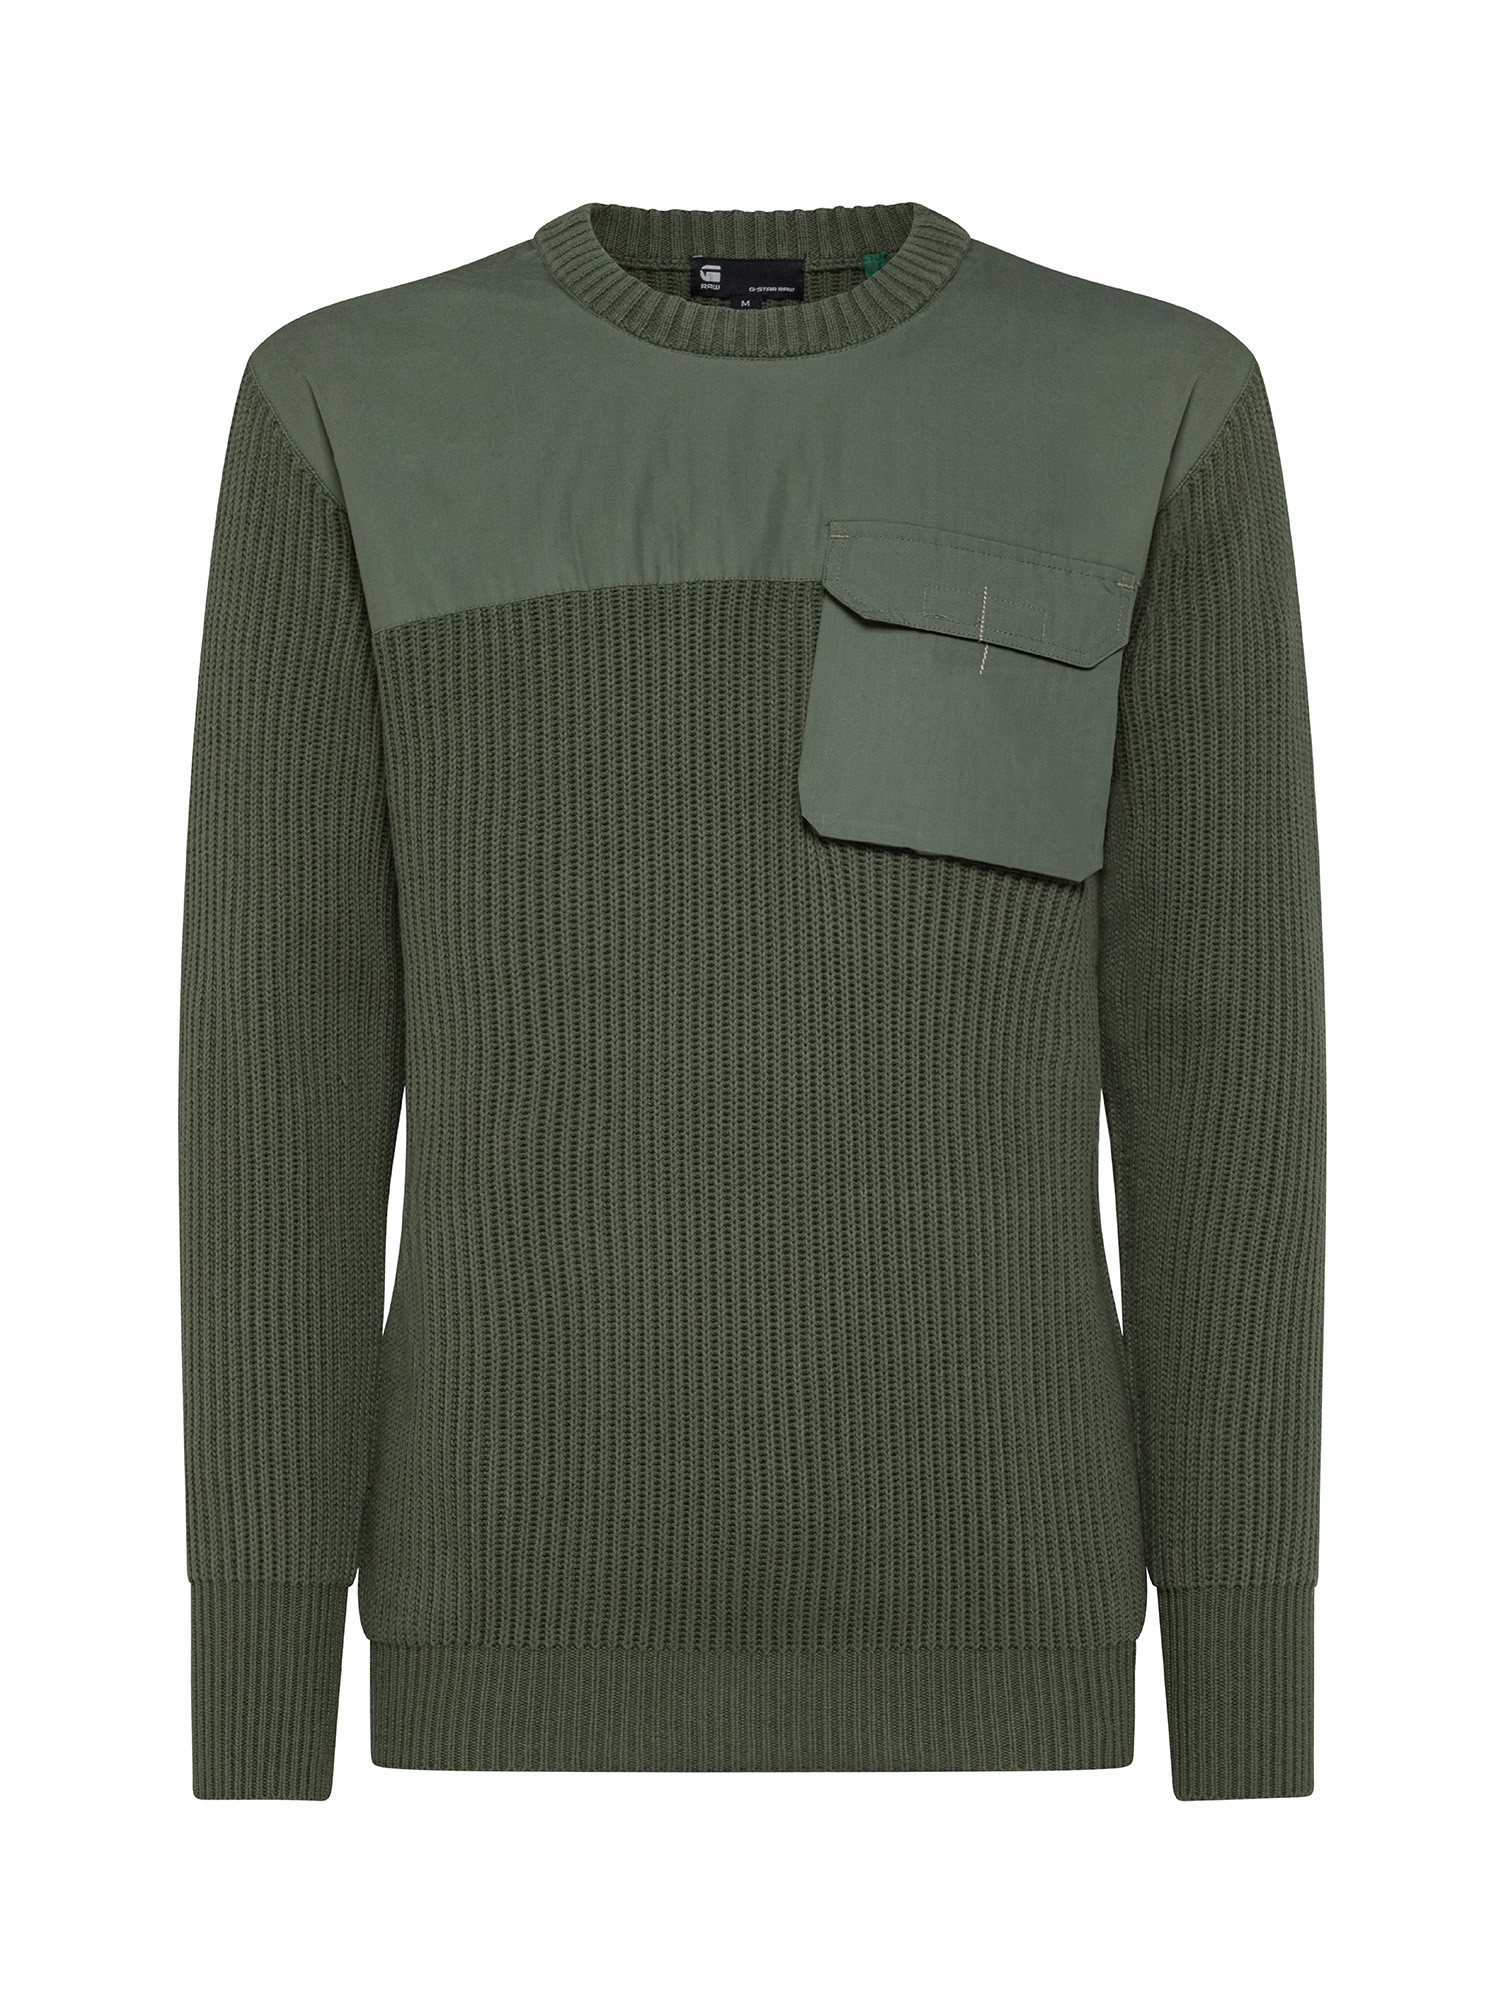 G-Star - Sweater with pocket, Olive Green, large image number 0